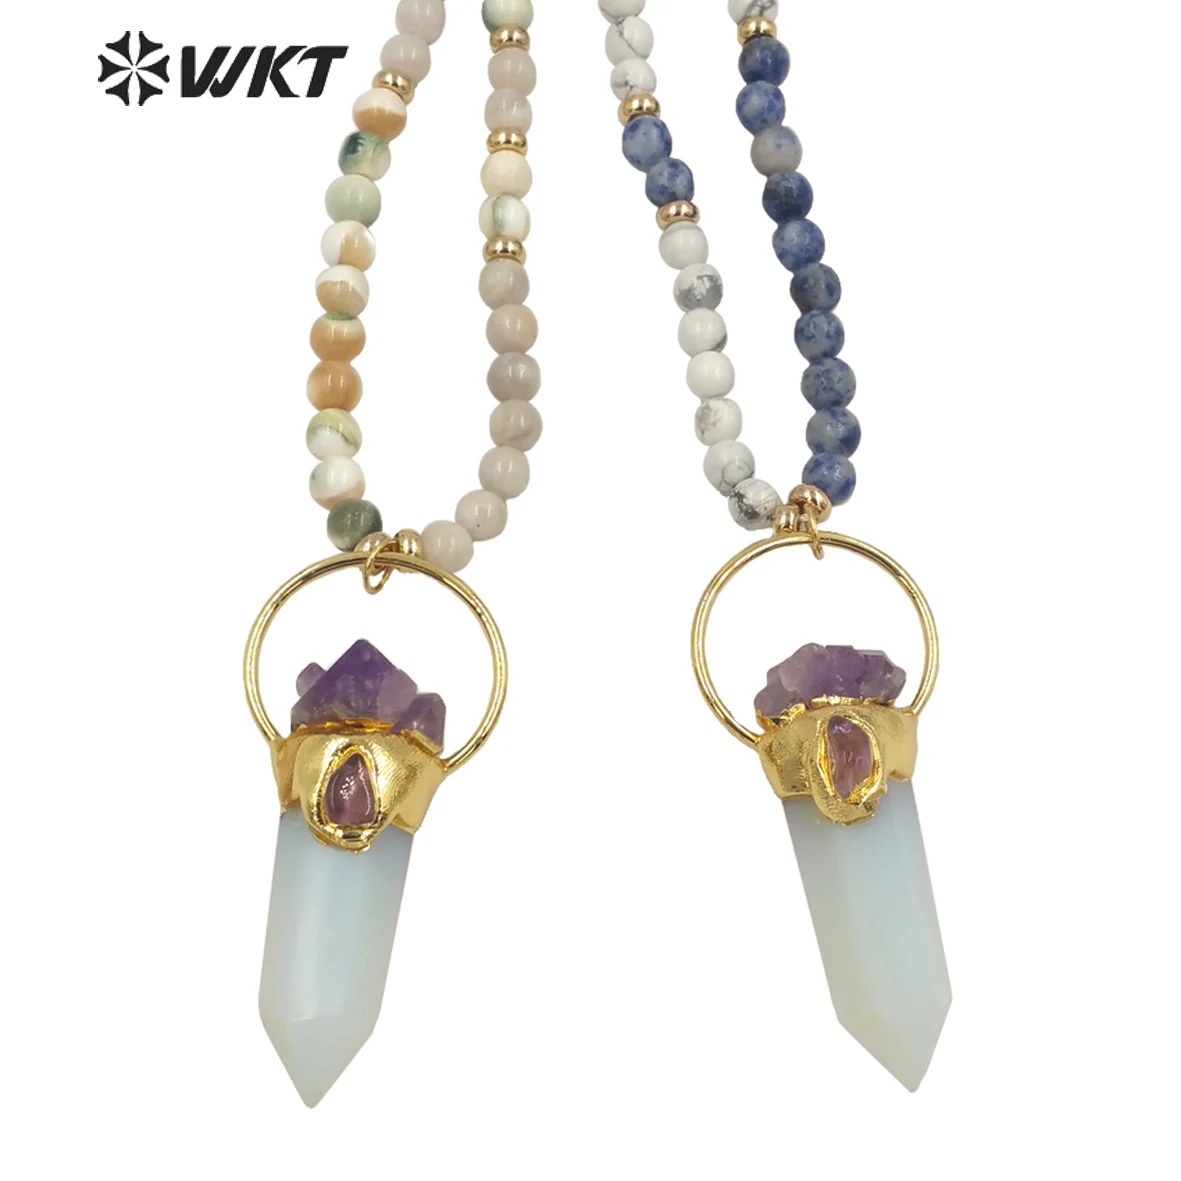 

WT-N1339 WKT Wholesale Punk Style Natural White Stone Necklace Bullet Shaped Pendant Small Bead Chain Lady Necklace Jewelry